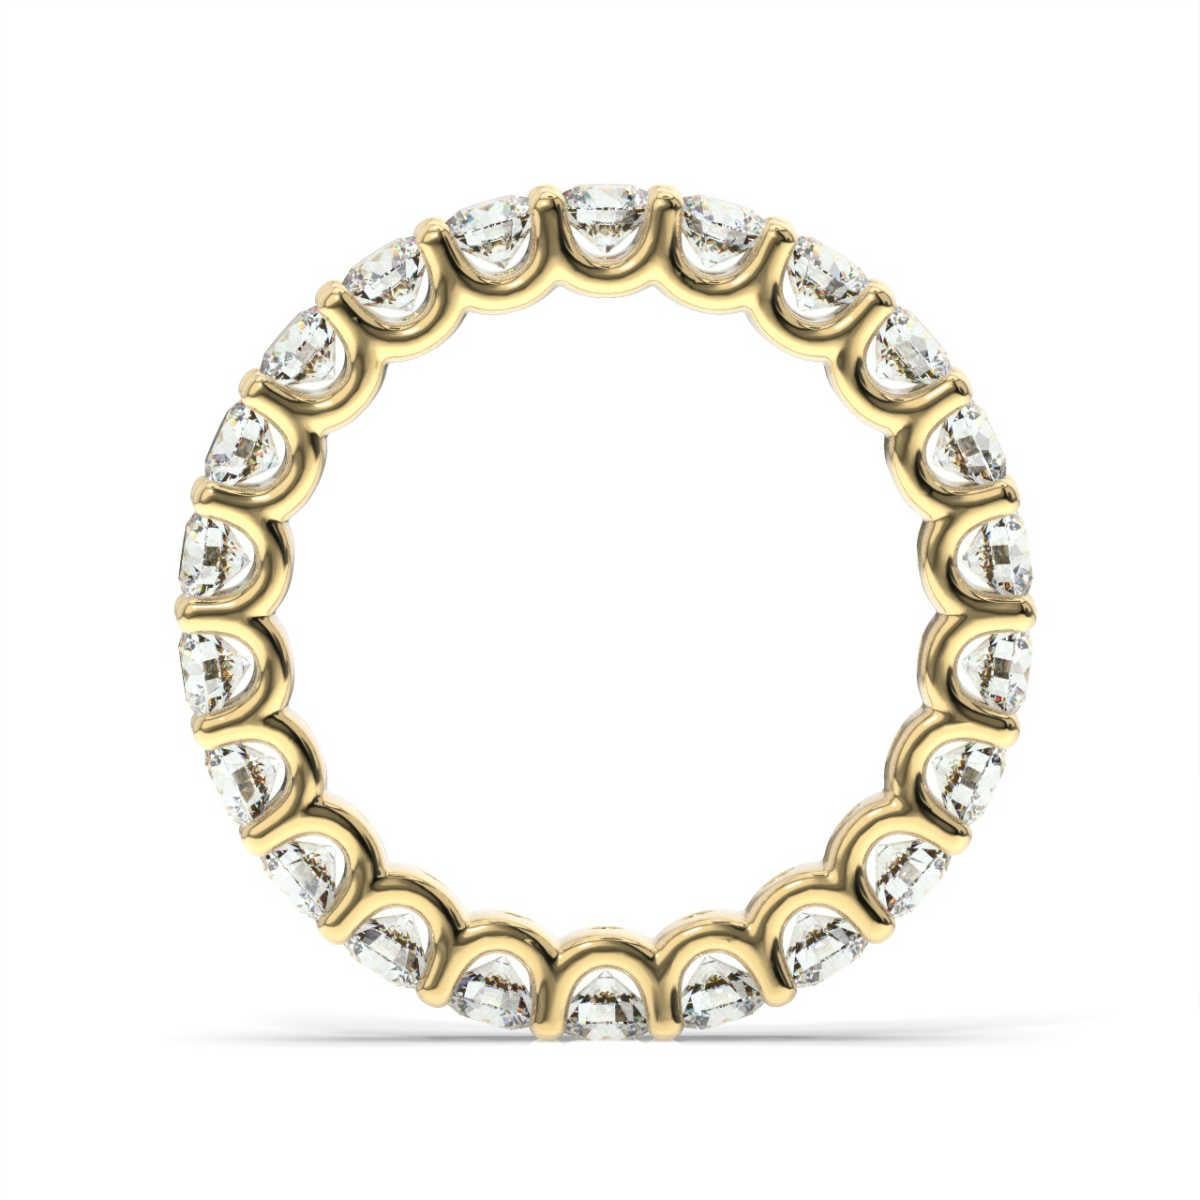 This eternity band features a perfectly matched round brilliant diamonds set in a 